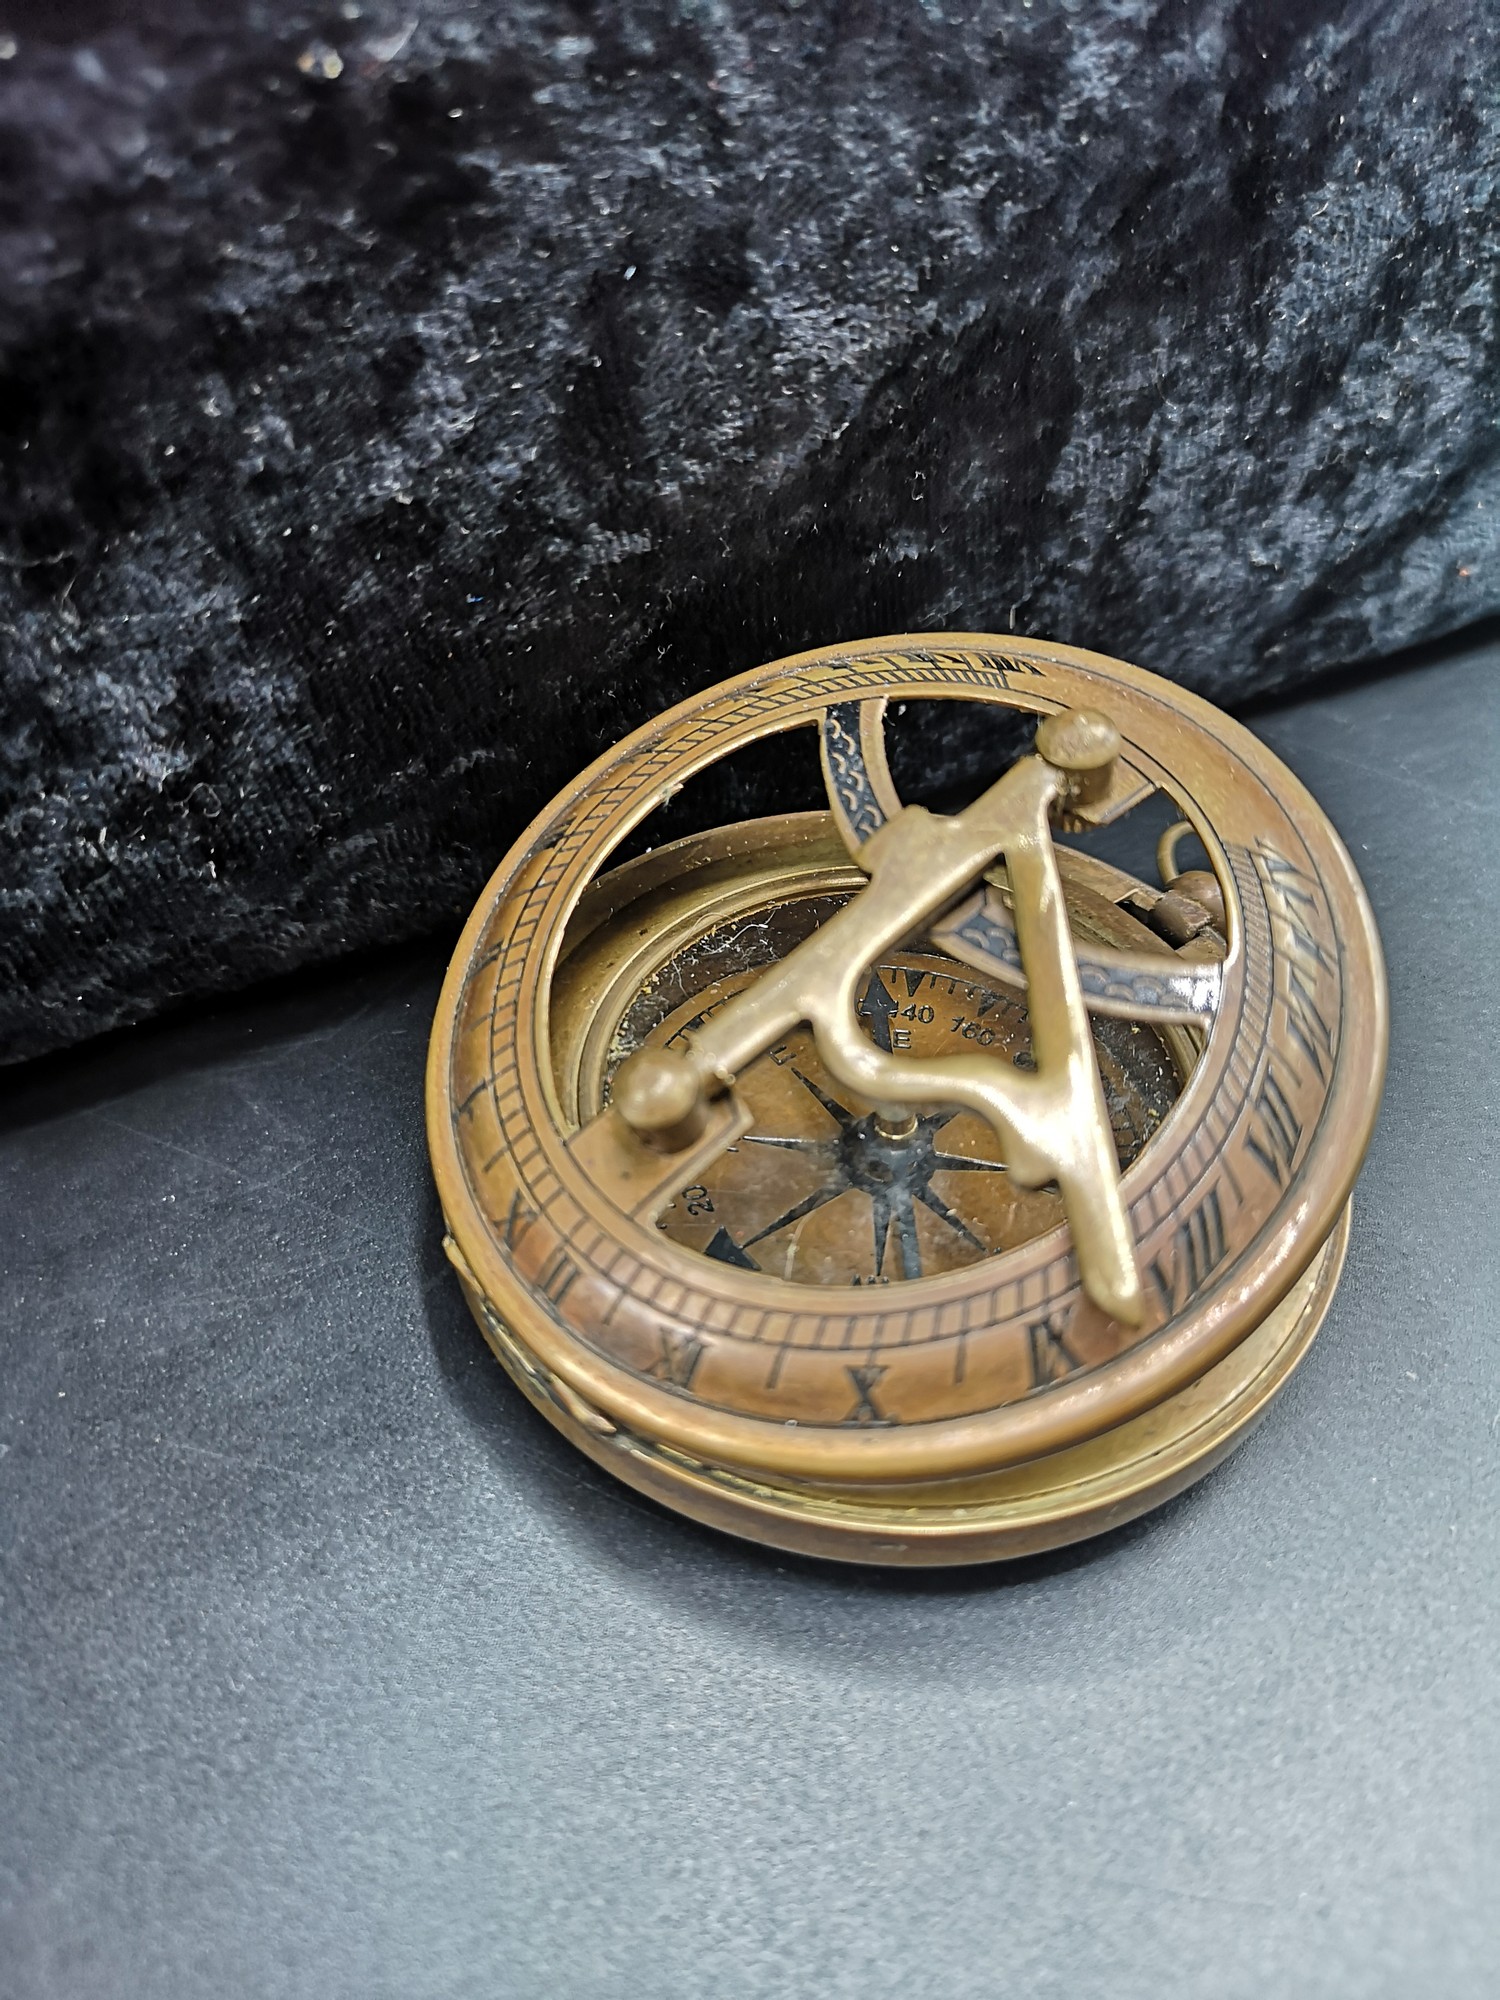 F Barker and sons London ornate compass dated 1904. - Image 5 of 5